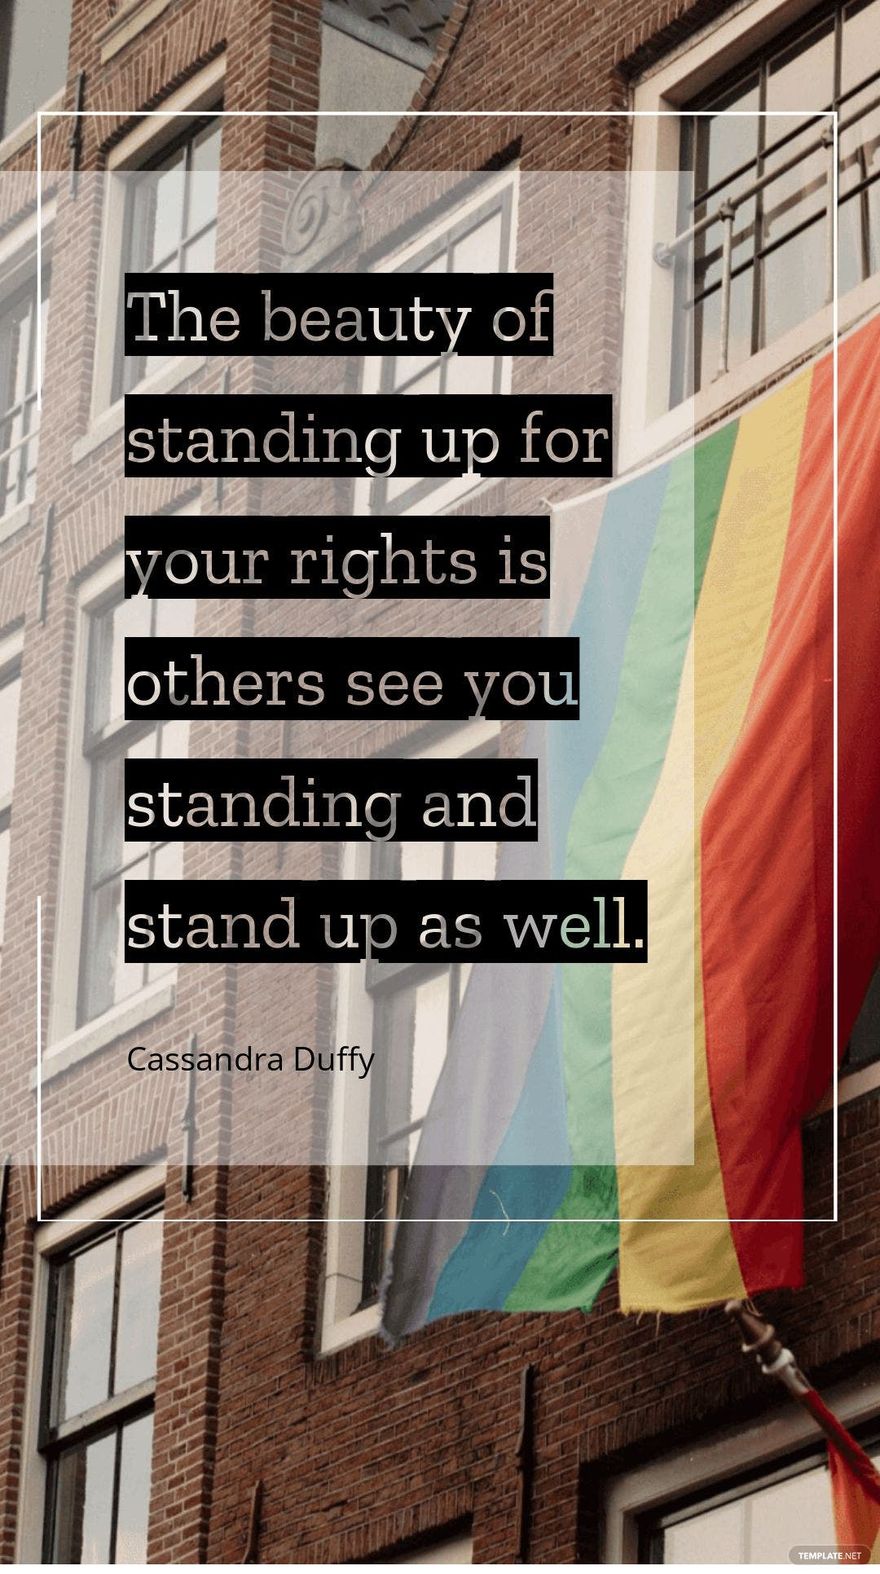 Cassandra Duffy - The beauty of standing up for your rights is others see you standing and stand up as well.